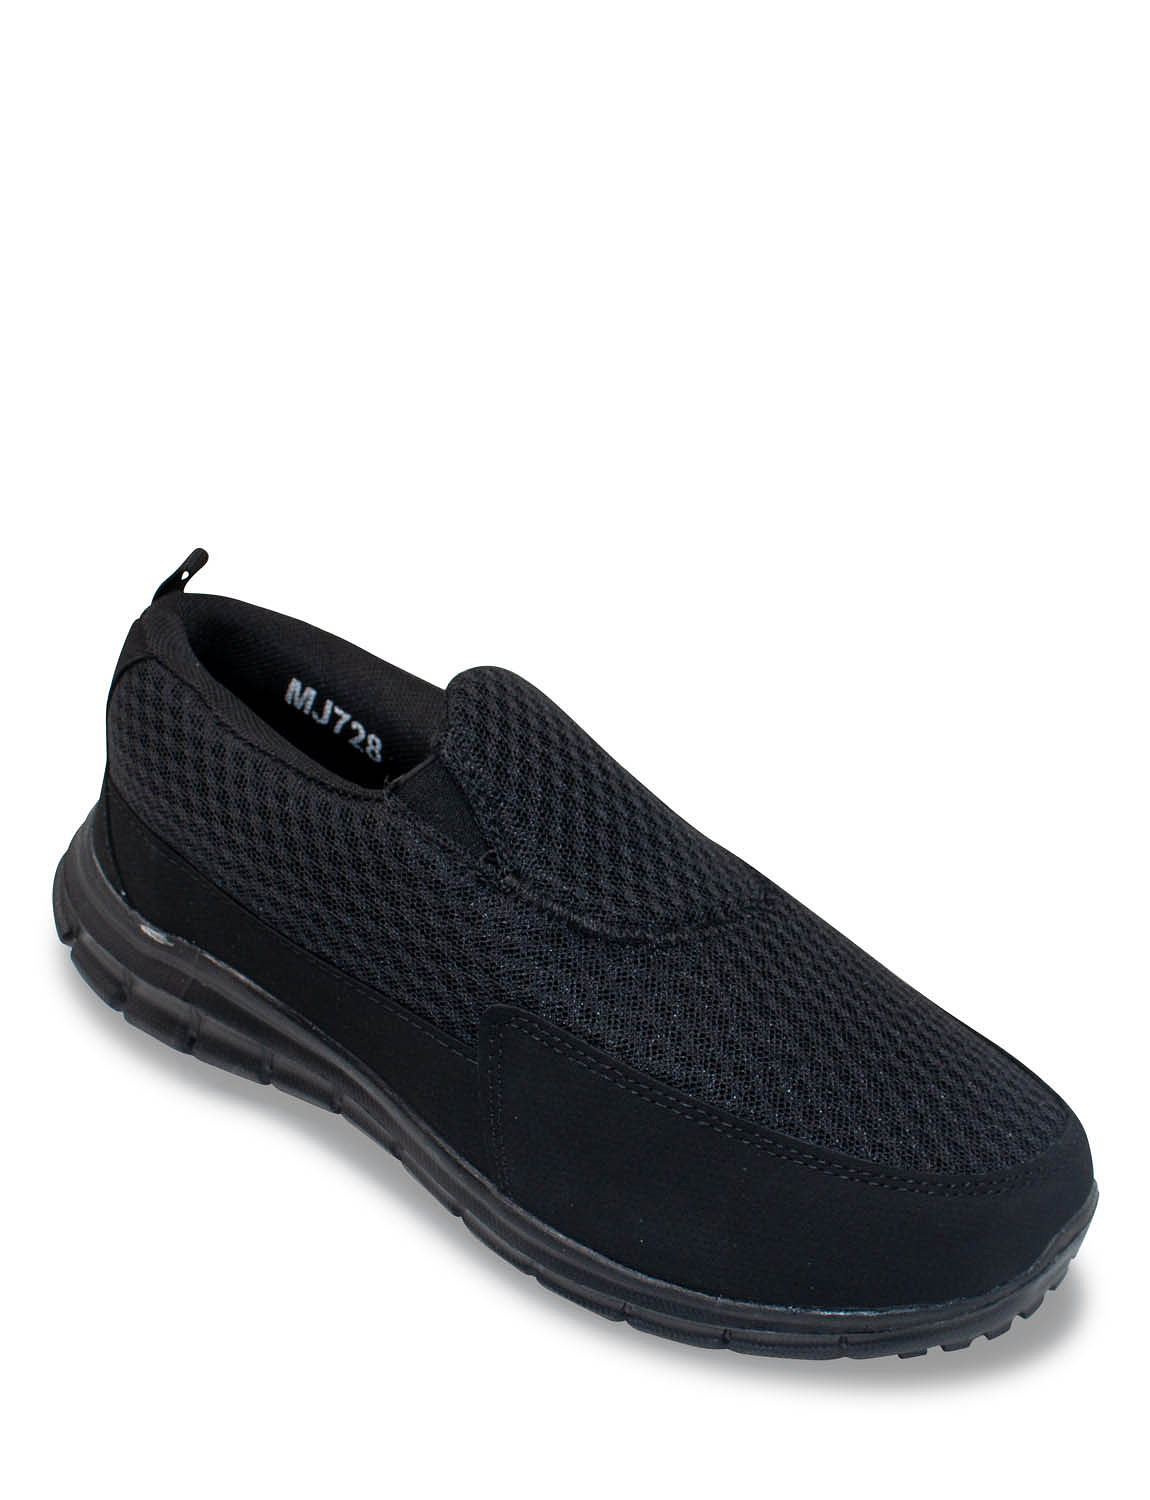 Pegasus Mesh Slip On Wide Fit Trainer | Chums